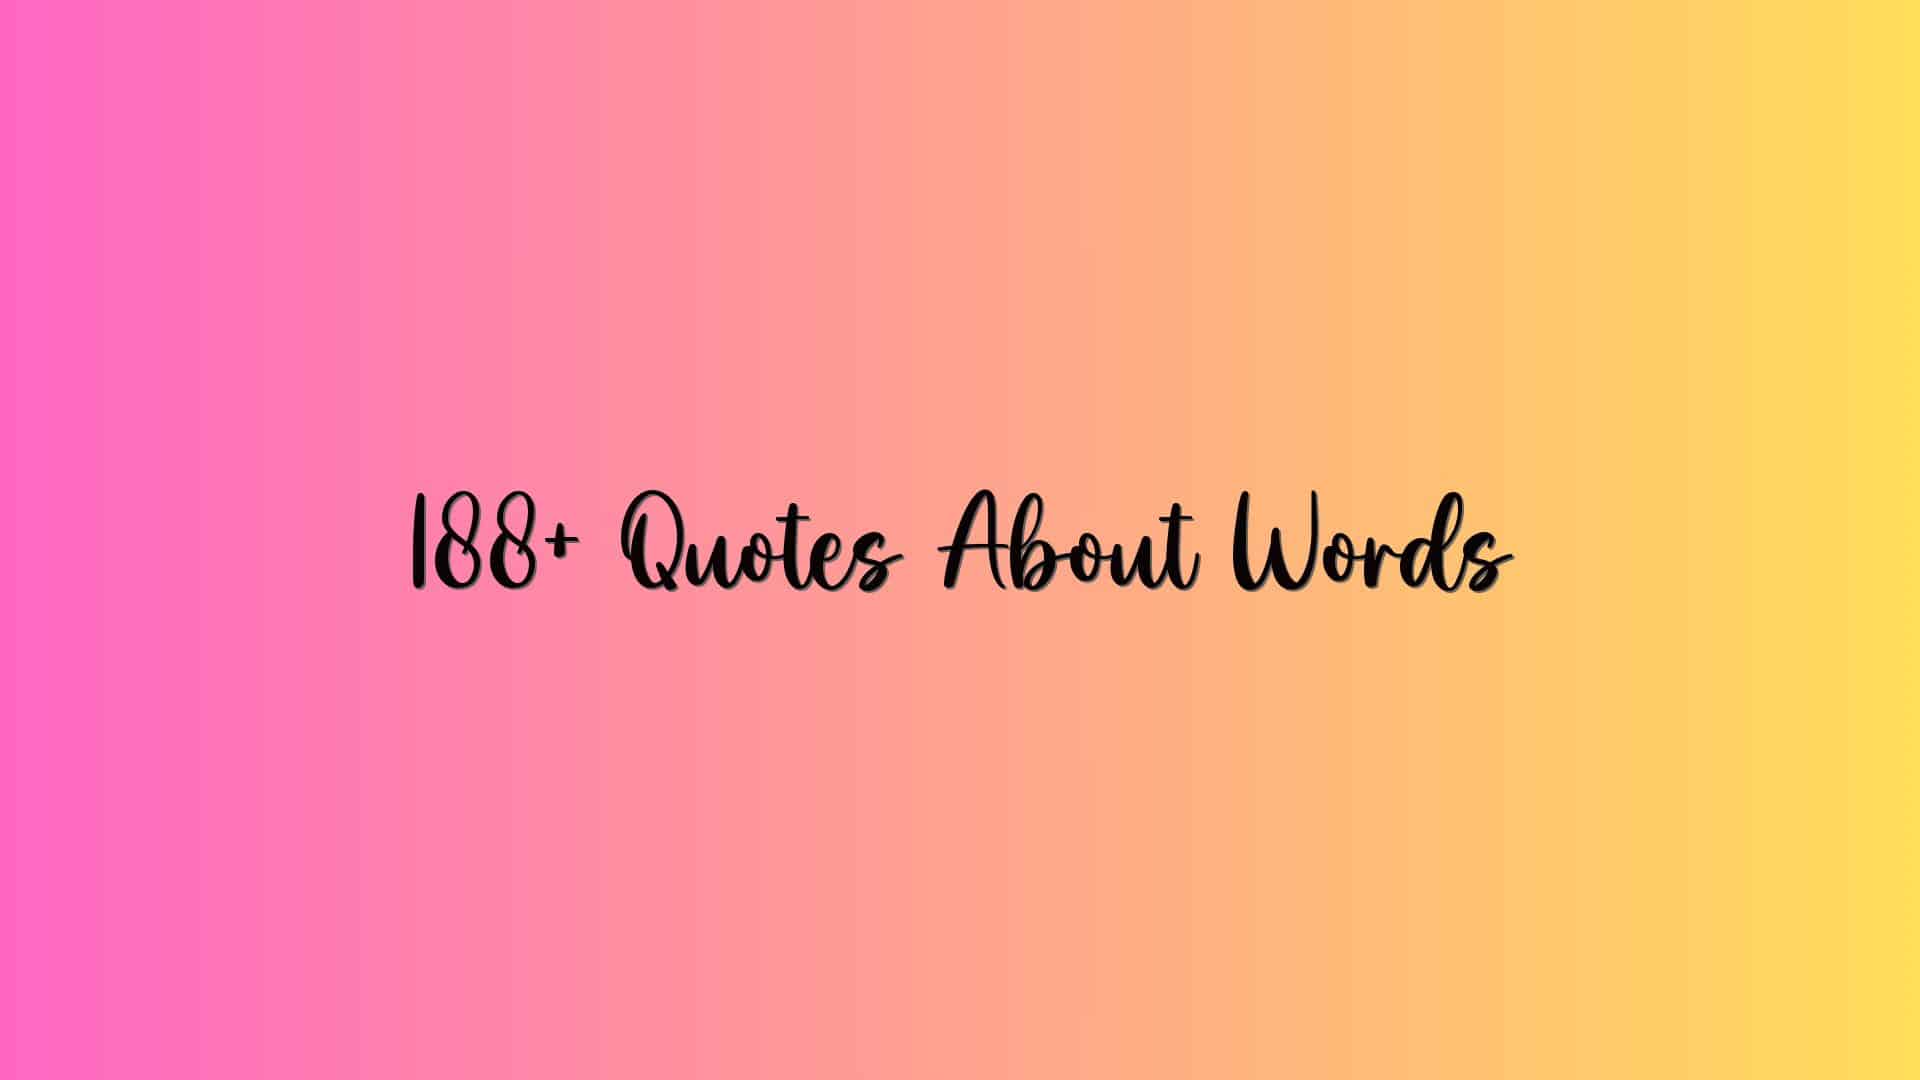 188+ Quotes About Words